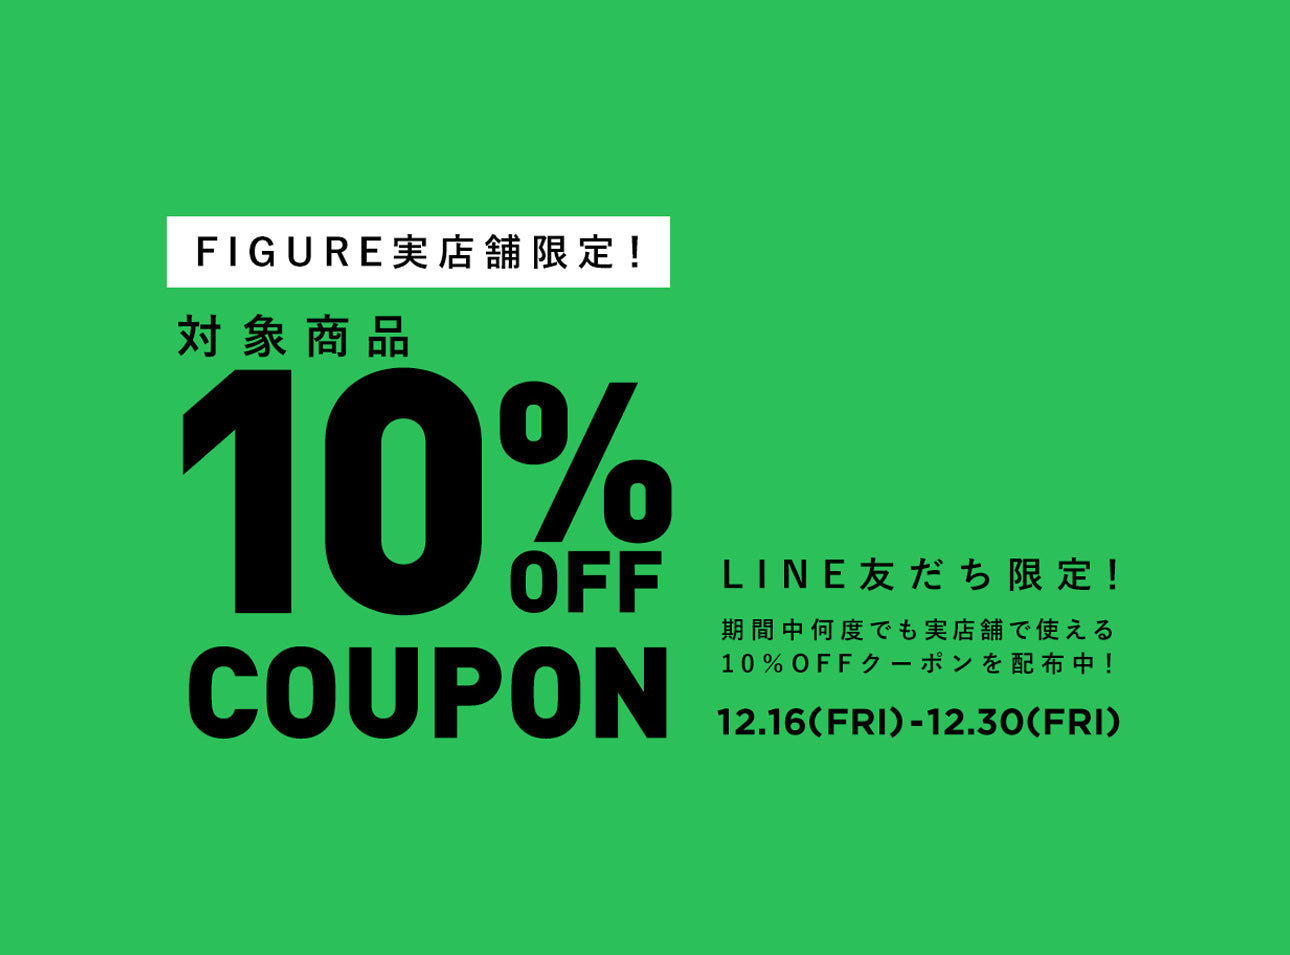 FIGURE SPECIAL CAMPAIGN  10％OFF COUPON PRESENT